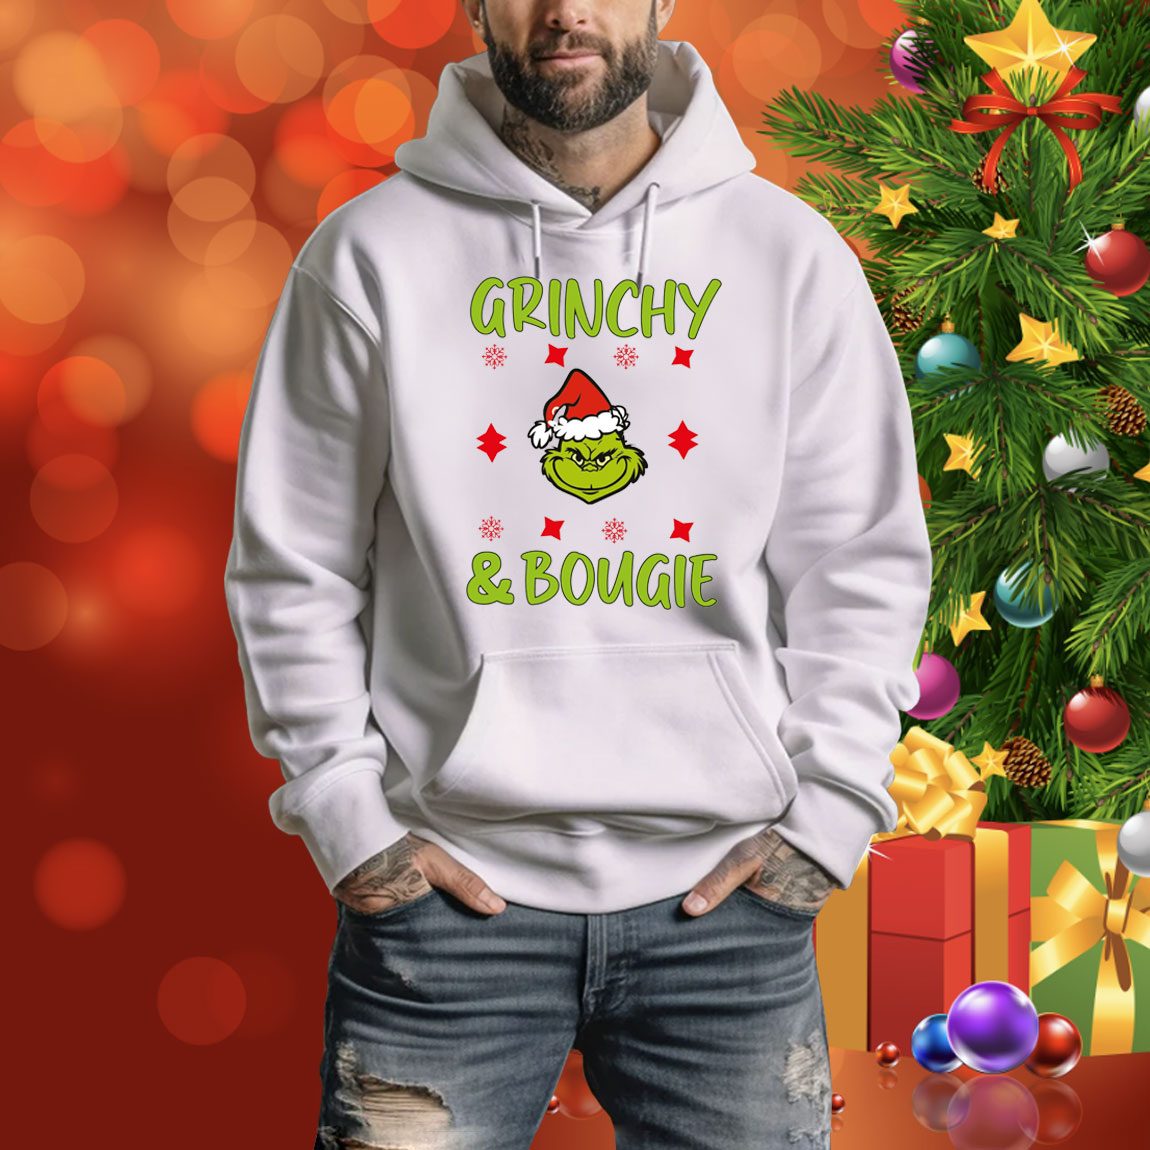 https://hollytees.com/wp-content/uploads/2023/12/Mean-Green-Guy-Christmas-Stanley-TumblerGrinchy-And-Bougie-Grinch-Christmas-Sweatshirts.jpg